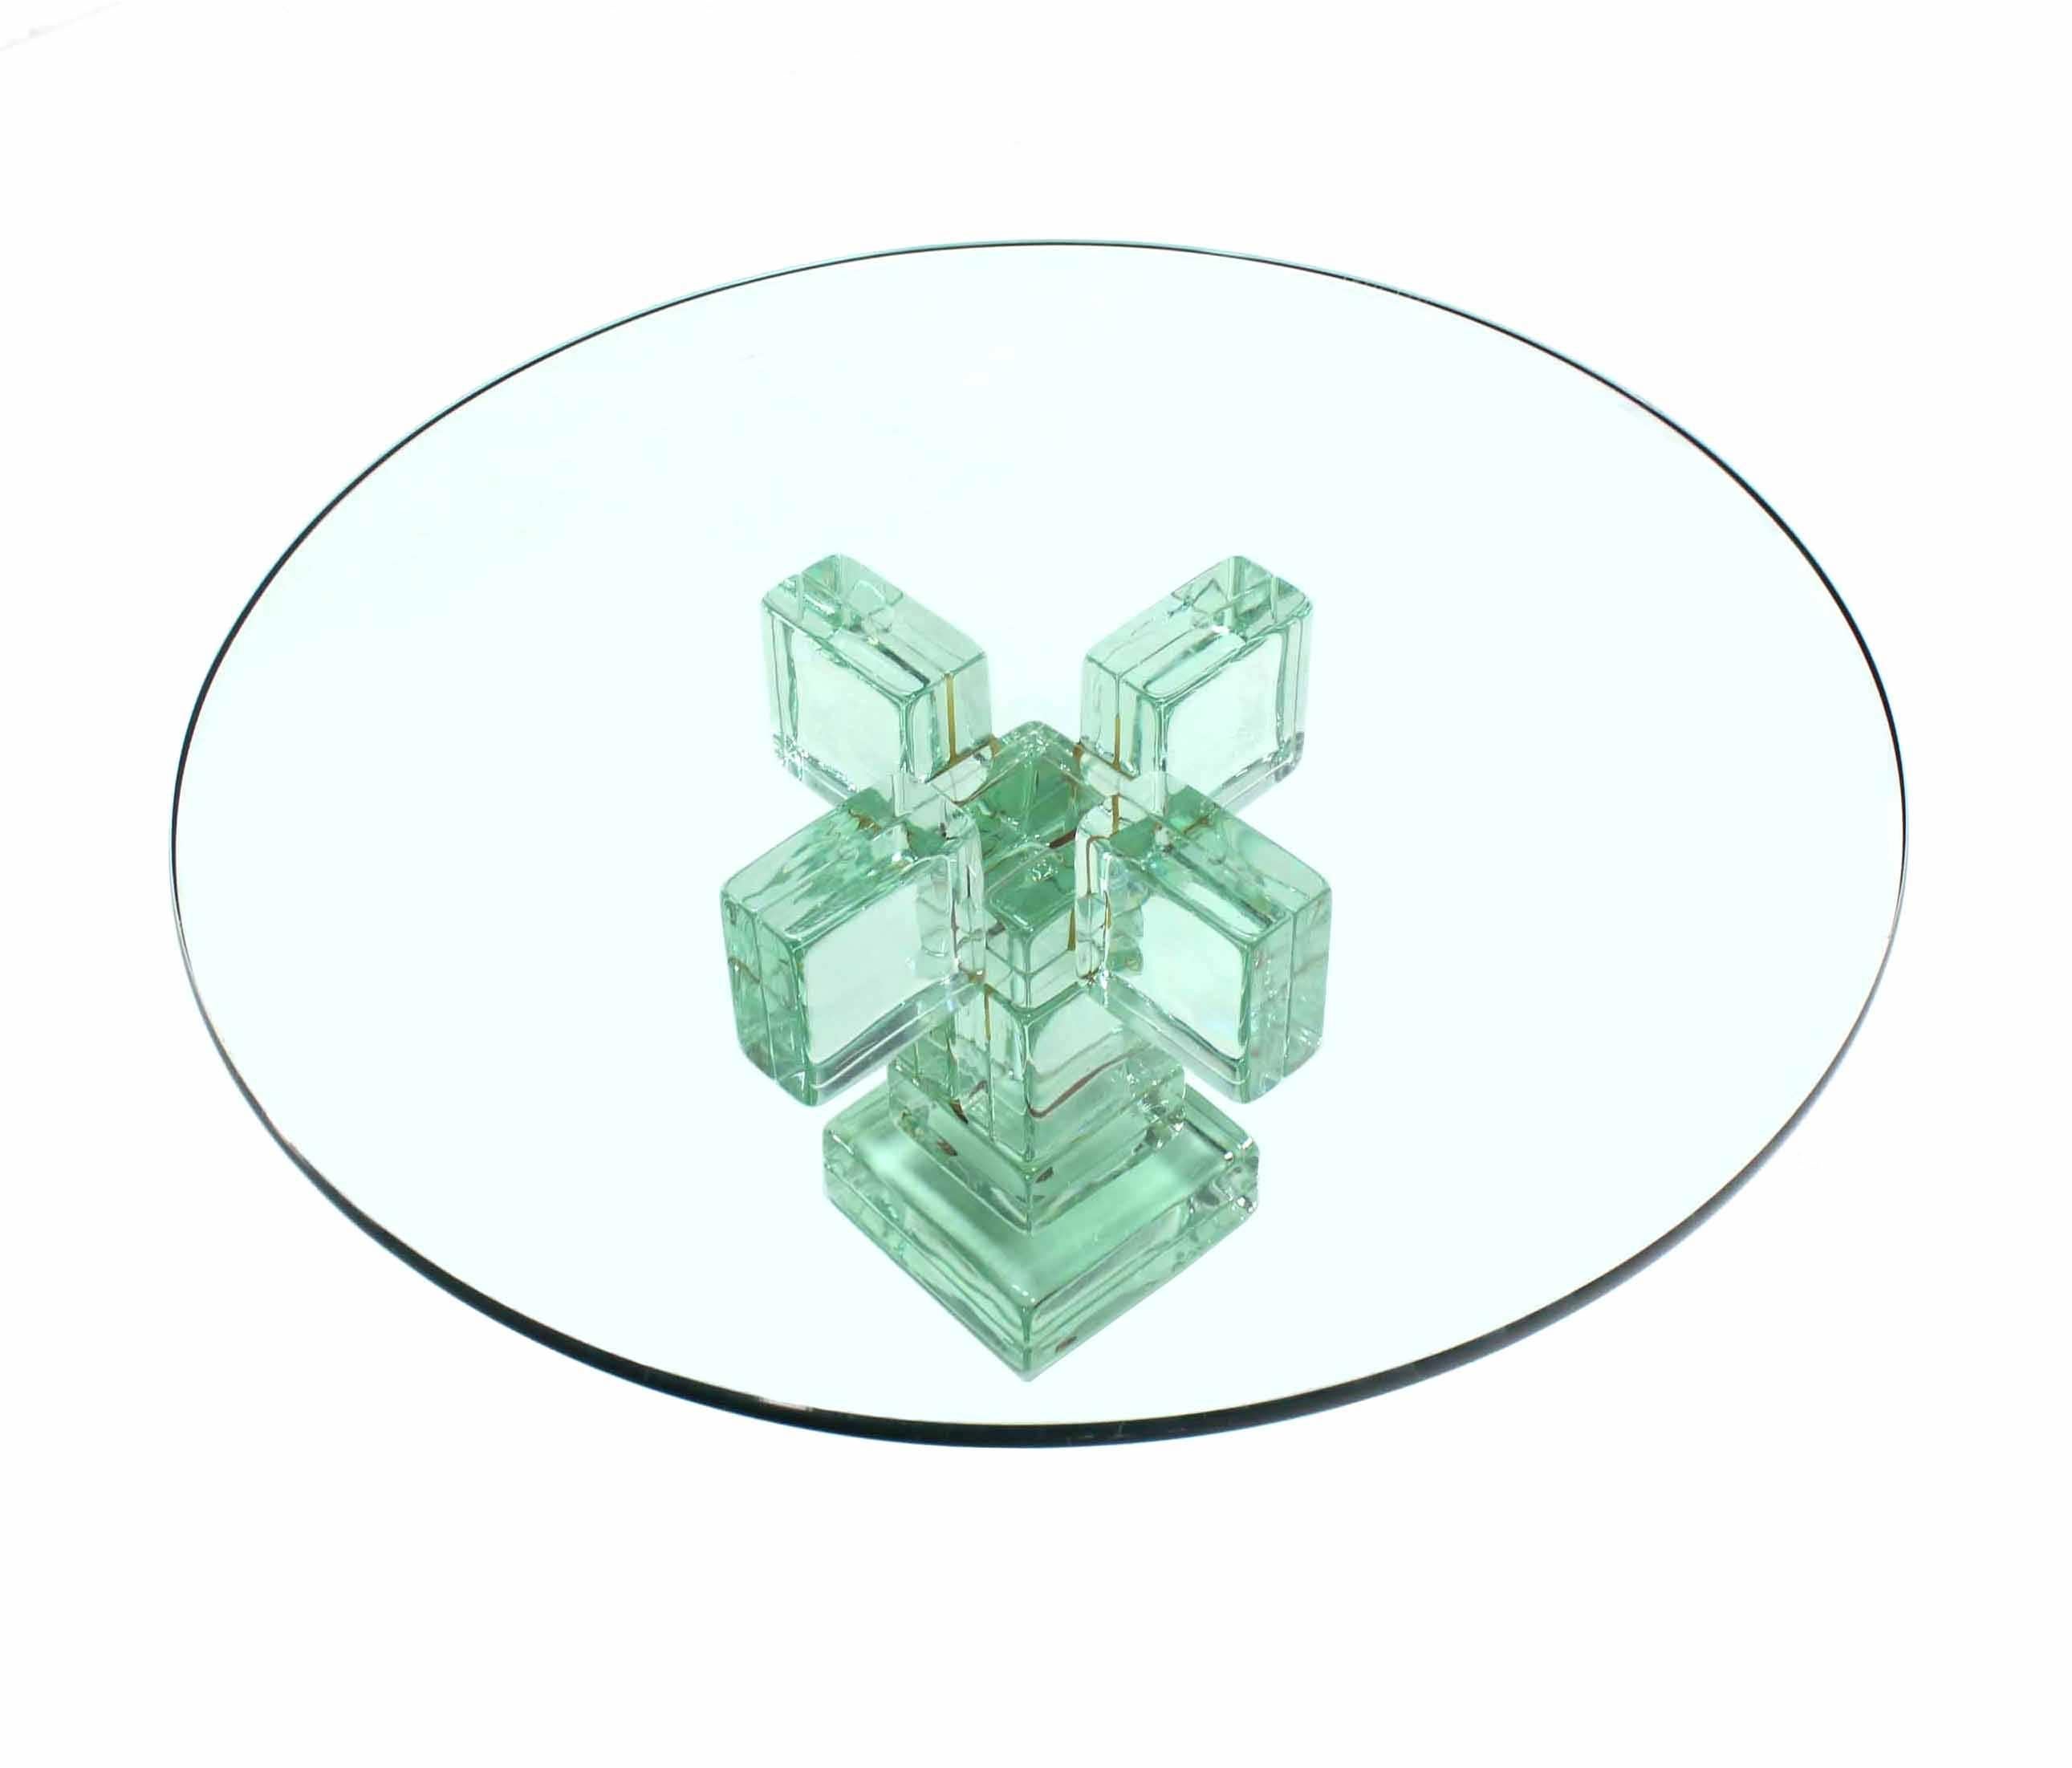 Unusual modern sculptural base made out of pale green glass block coffee table. Imperial Imagineering